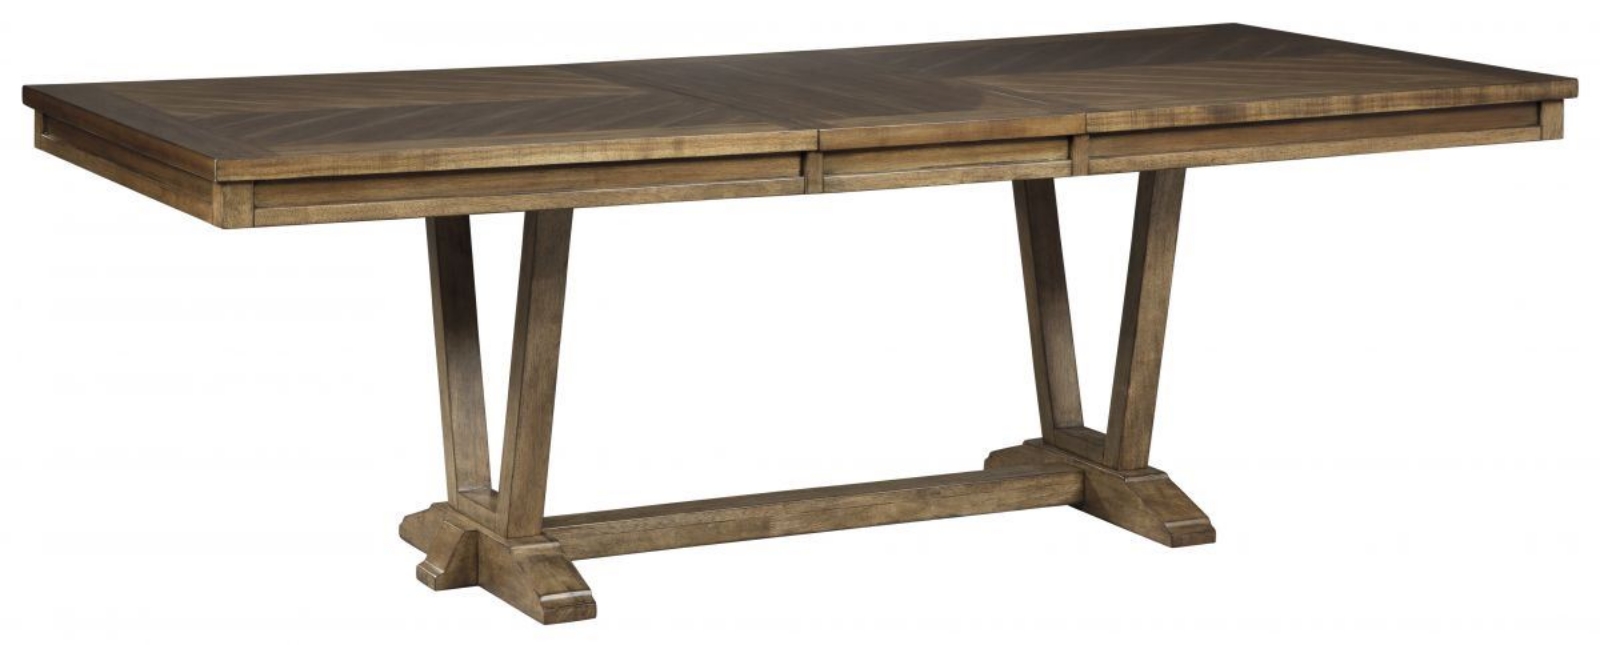 Picture of Colestad Dining Table